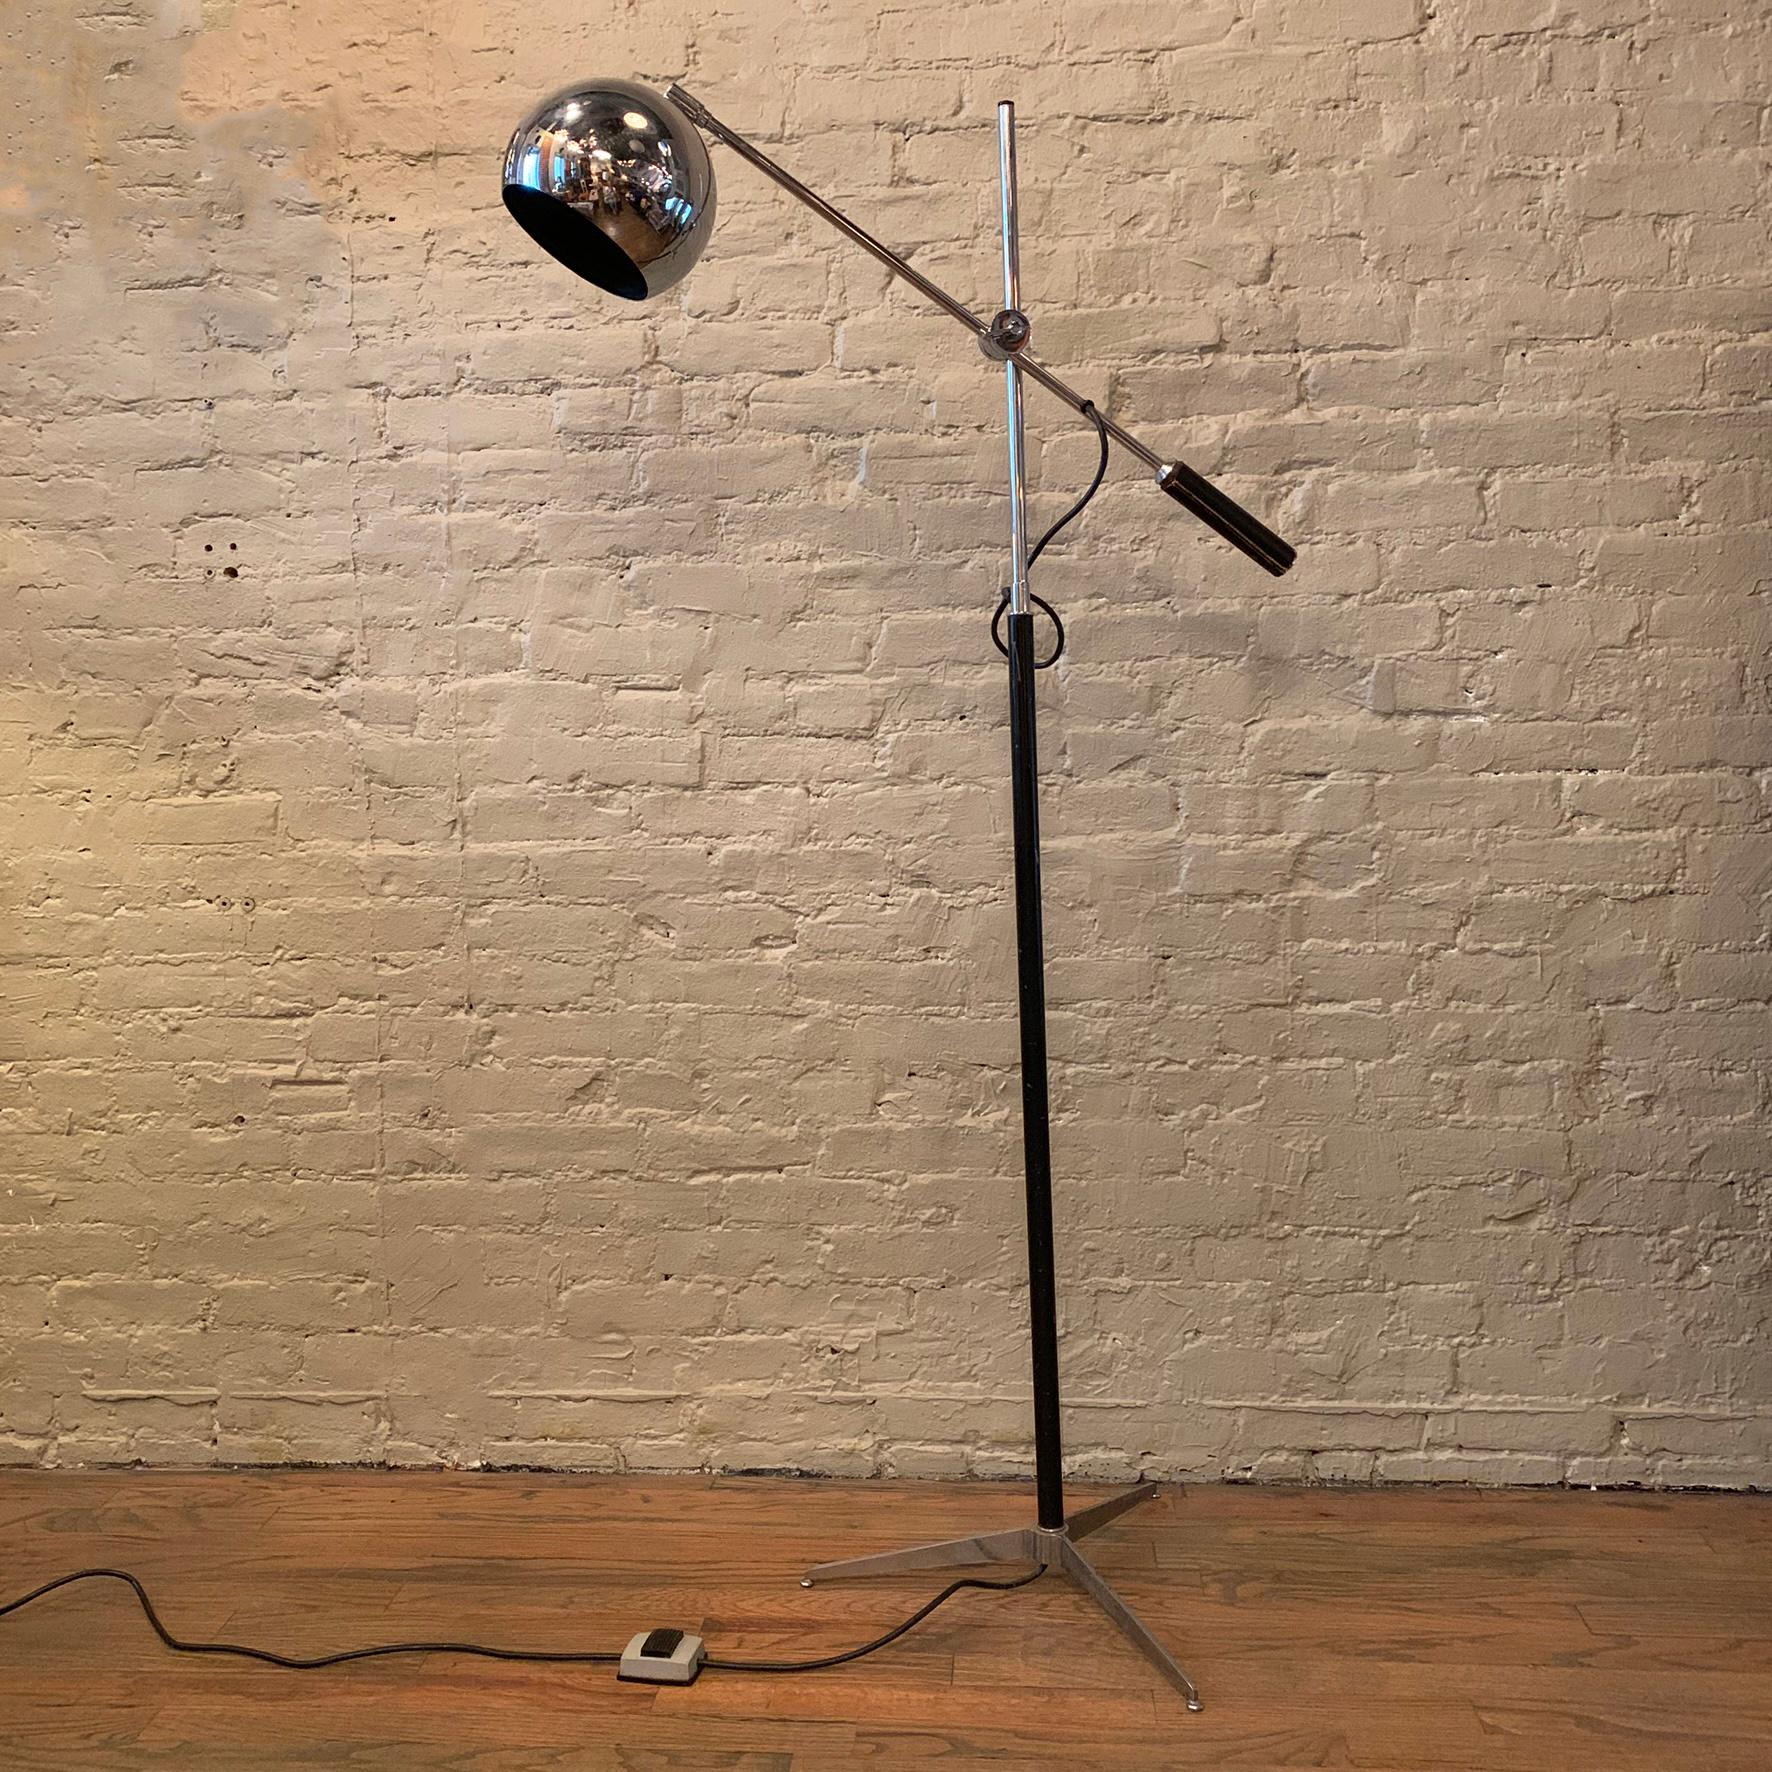 Mid-Century Modern, floor lamp by Robert Sonneman features a chrome and painted stem with tripod base and height adjustable extension arm with leather handle and eyeball shade. The stem height is 58 inches and the foot print is 20 inches. The arm